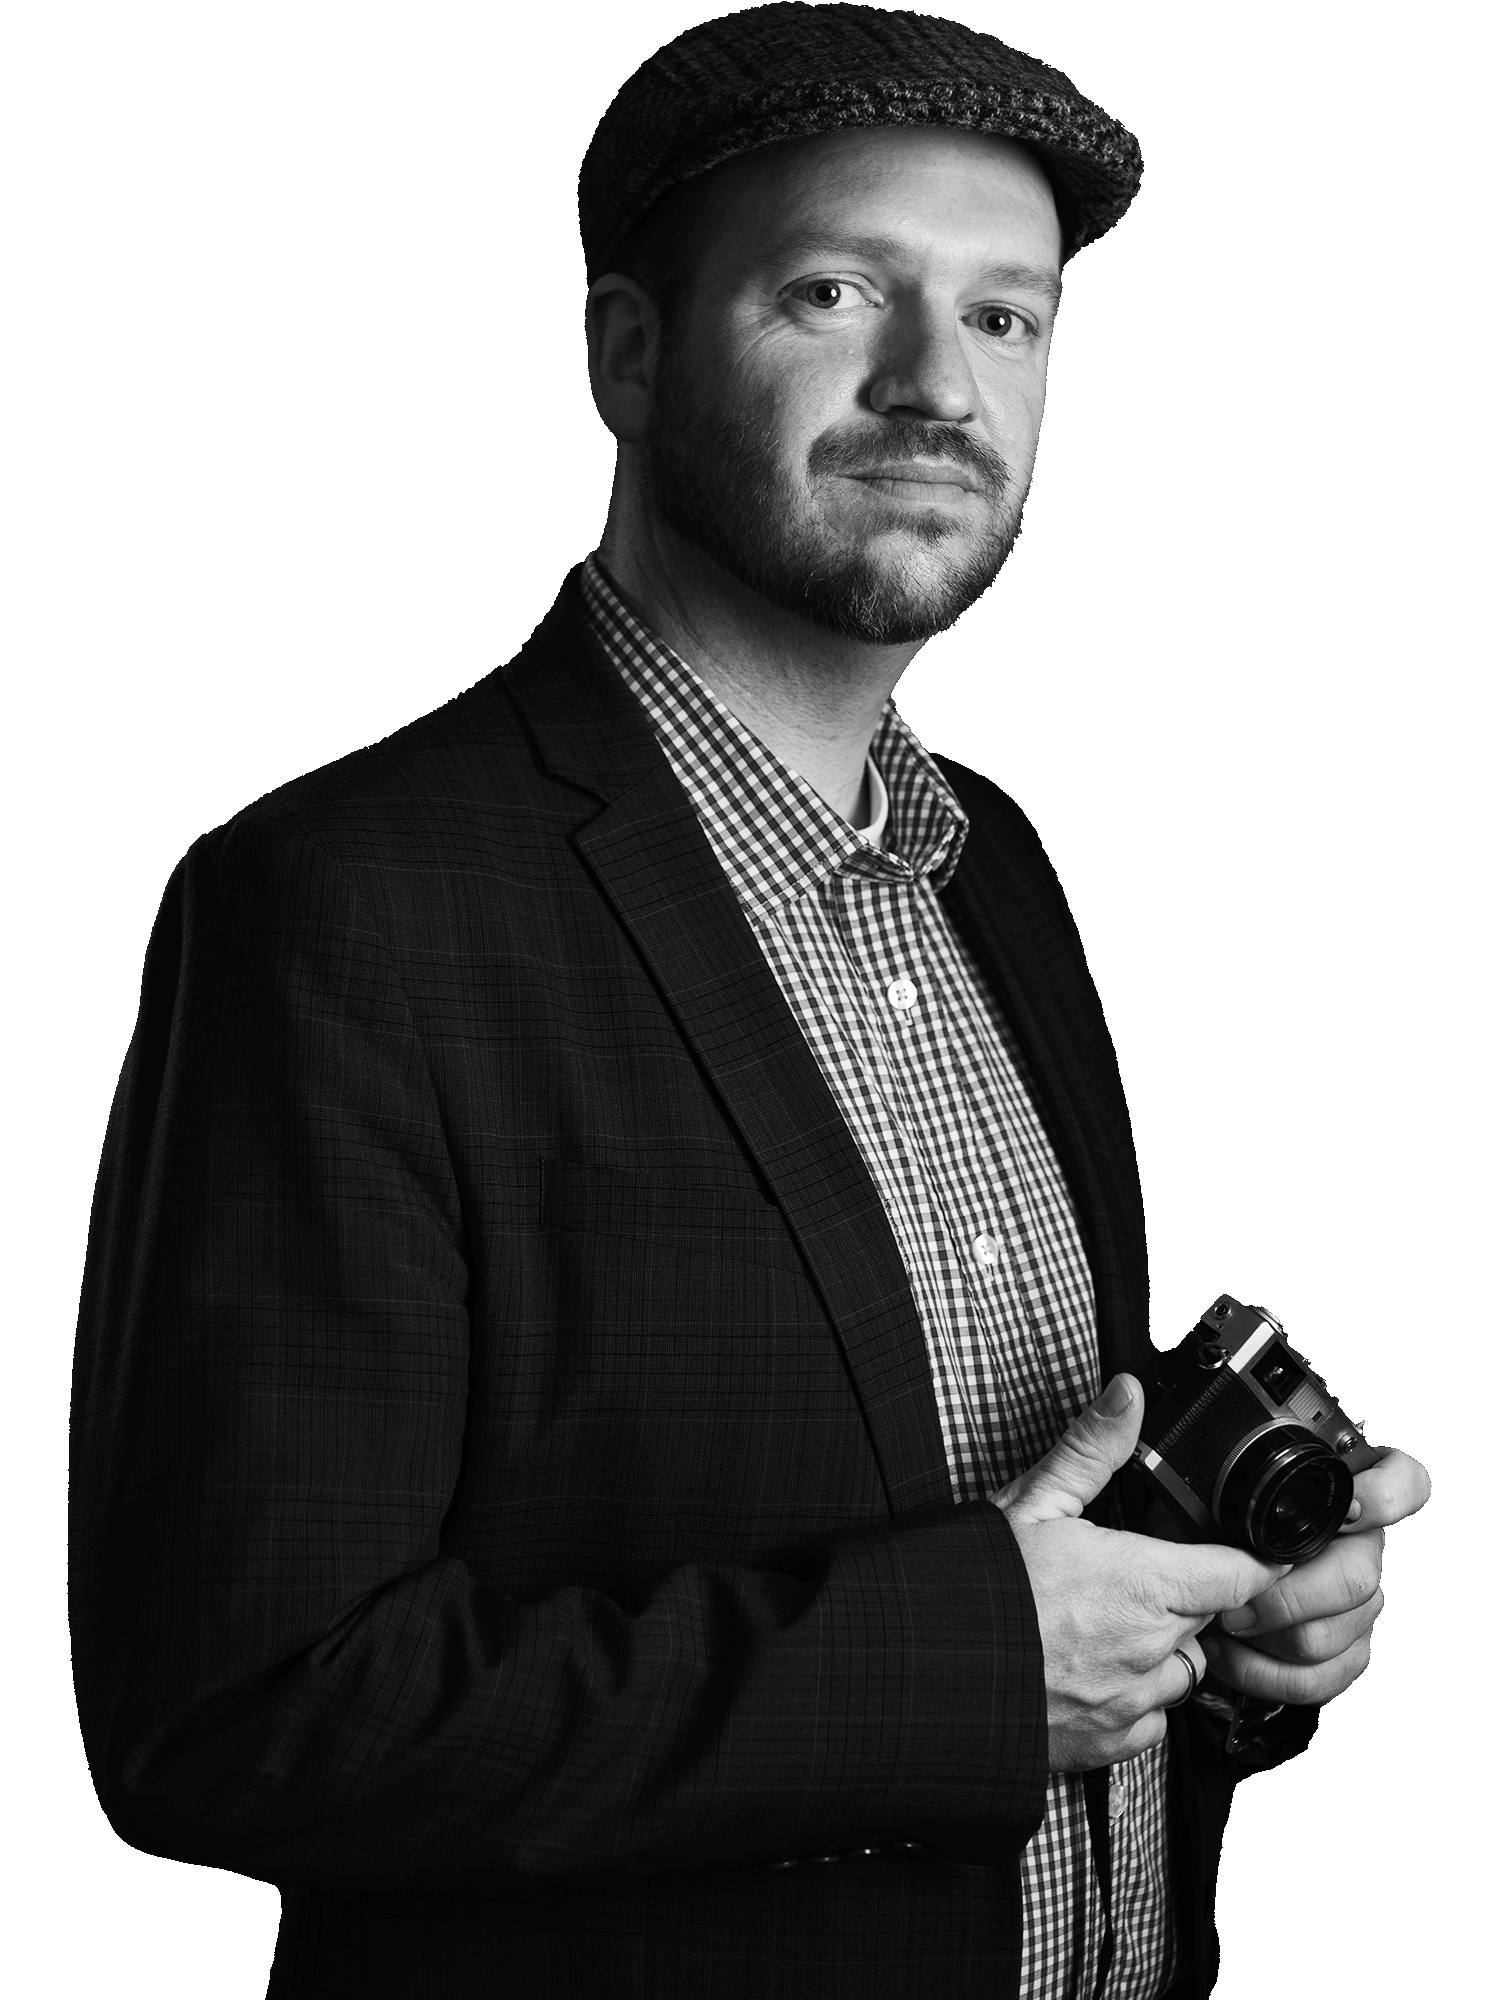 Portrait of professional photographer Nick Perry holding a vintage camera